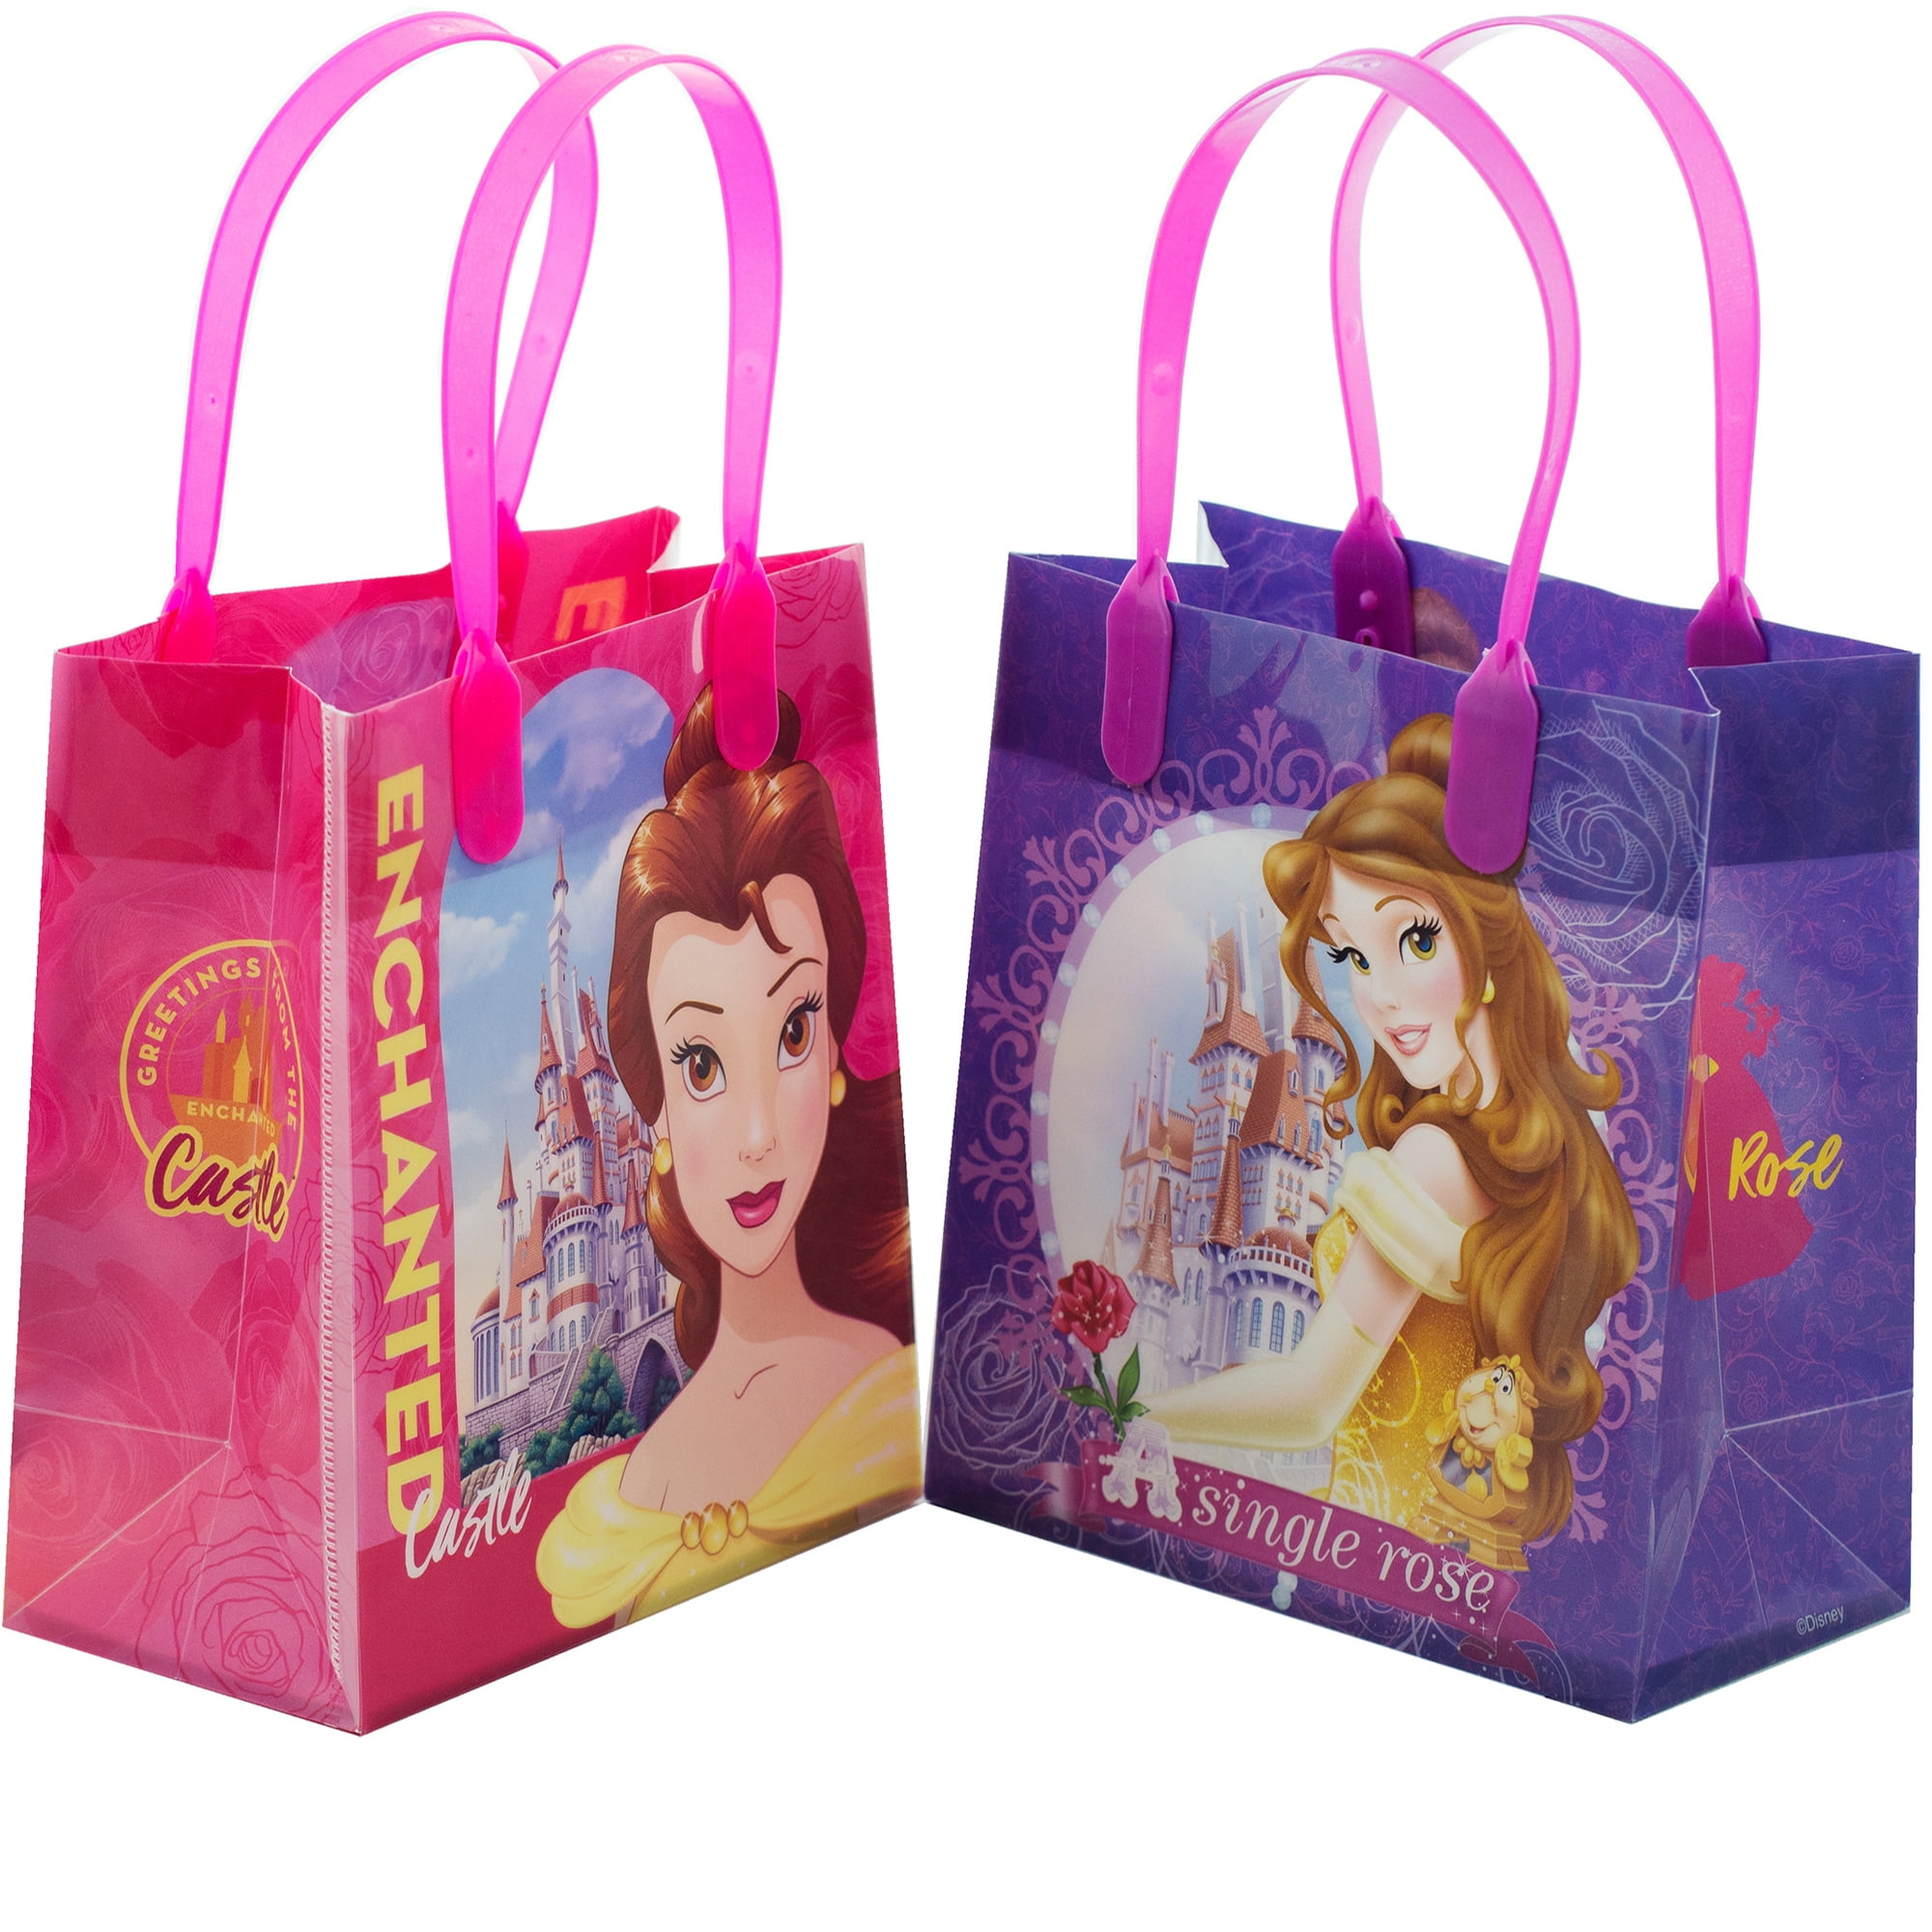 DISNEY SOFIA THE FIRST PARTY FAVOR BAGS 6  PCS GOODIE CANDY GIFT SOPHIA BIRTHDAY 